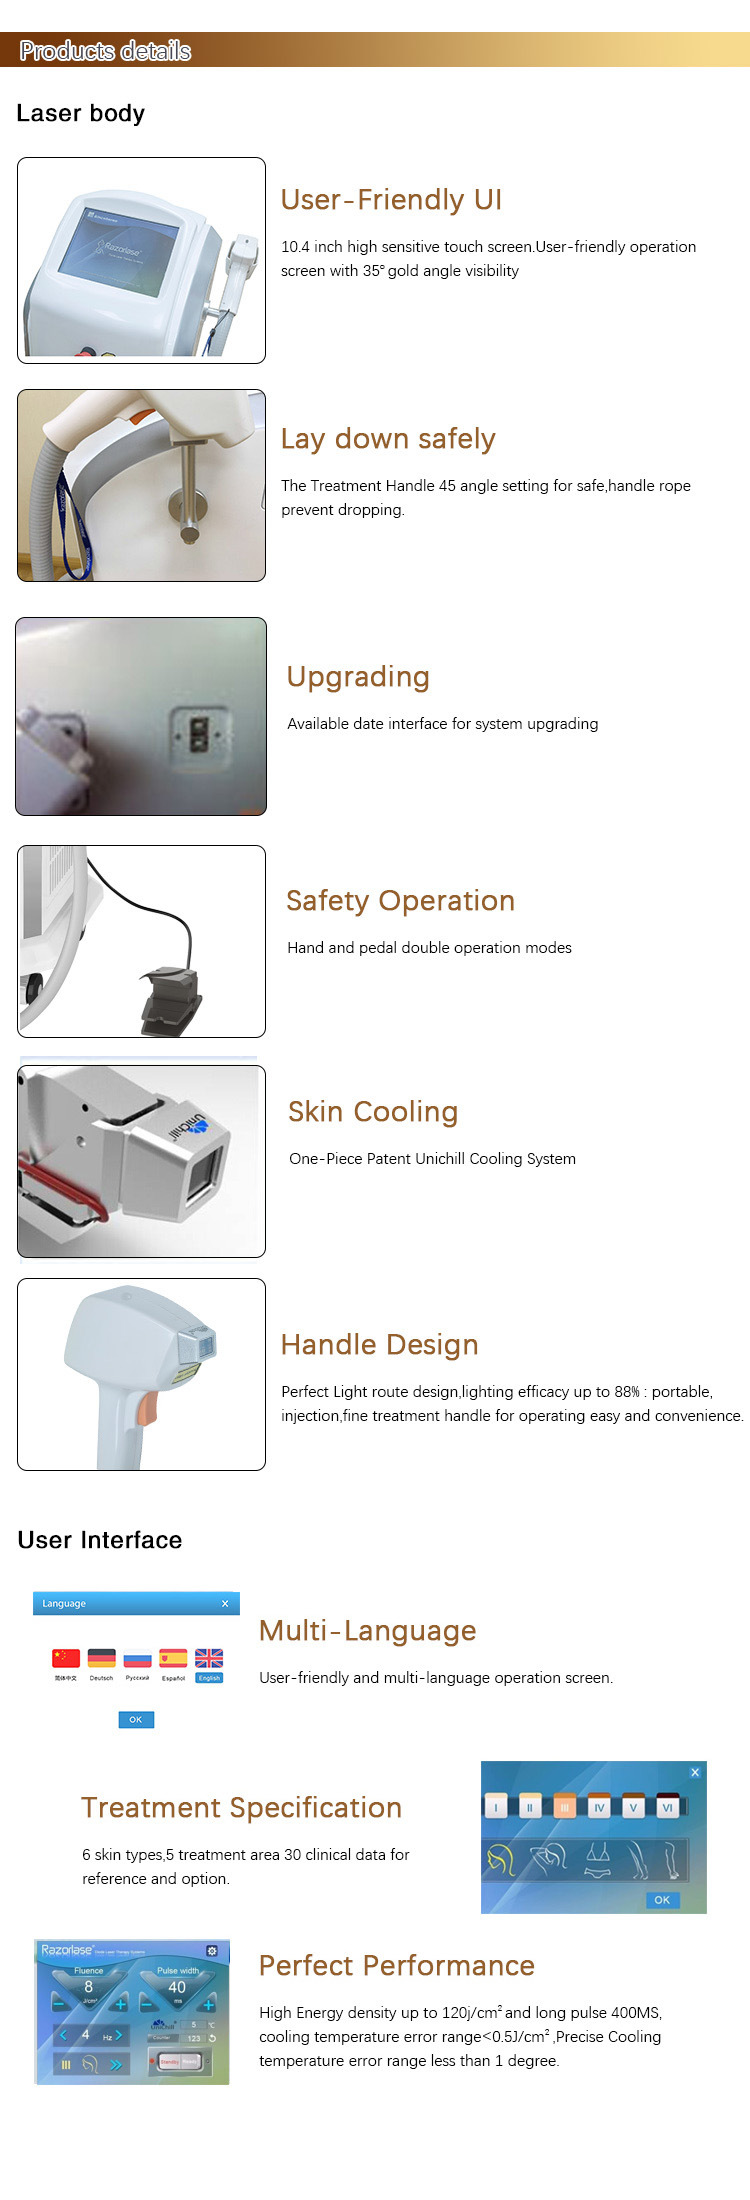 2019 New Products Sincoheren Small MOQ Fiber Laser Hair Removal Diode Laser 808 Beauty Machine